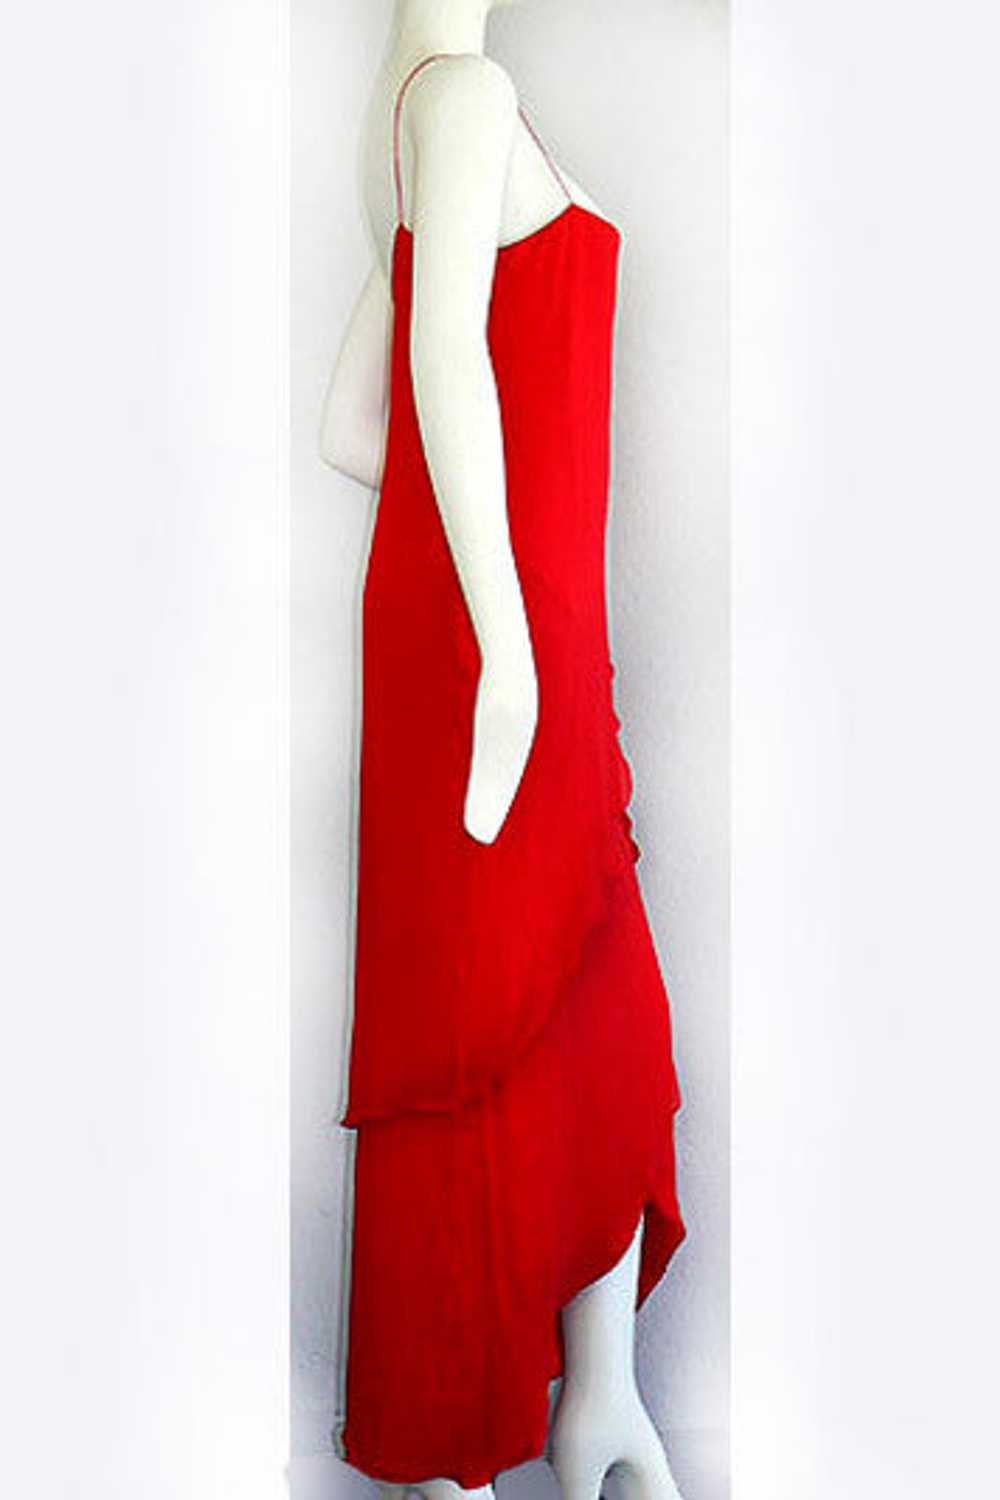 1970s Bill Blass Red Gown - image 3